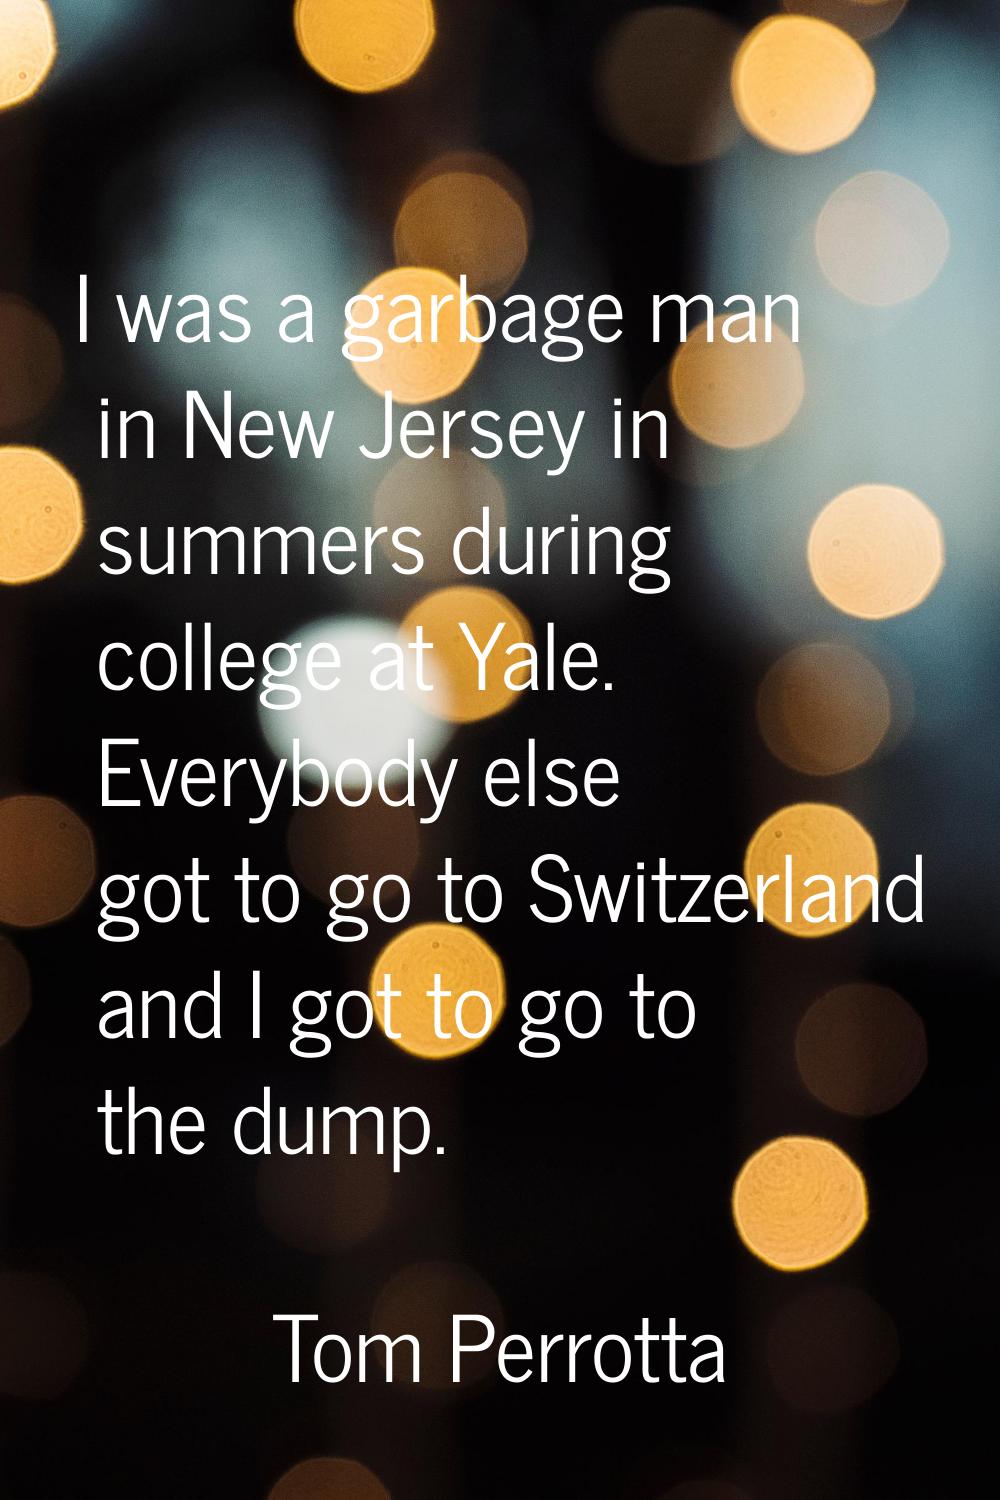 I was a garbage man in New Jersey in summers during college at Yale. Everybody else got to go to Sw